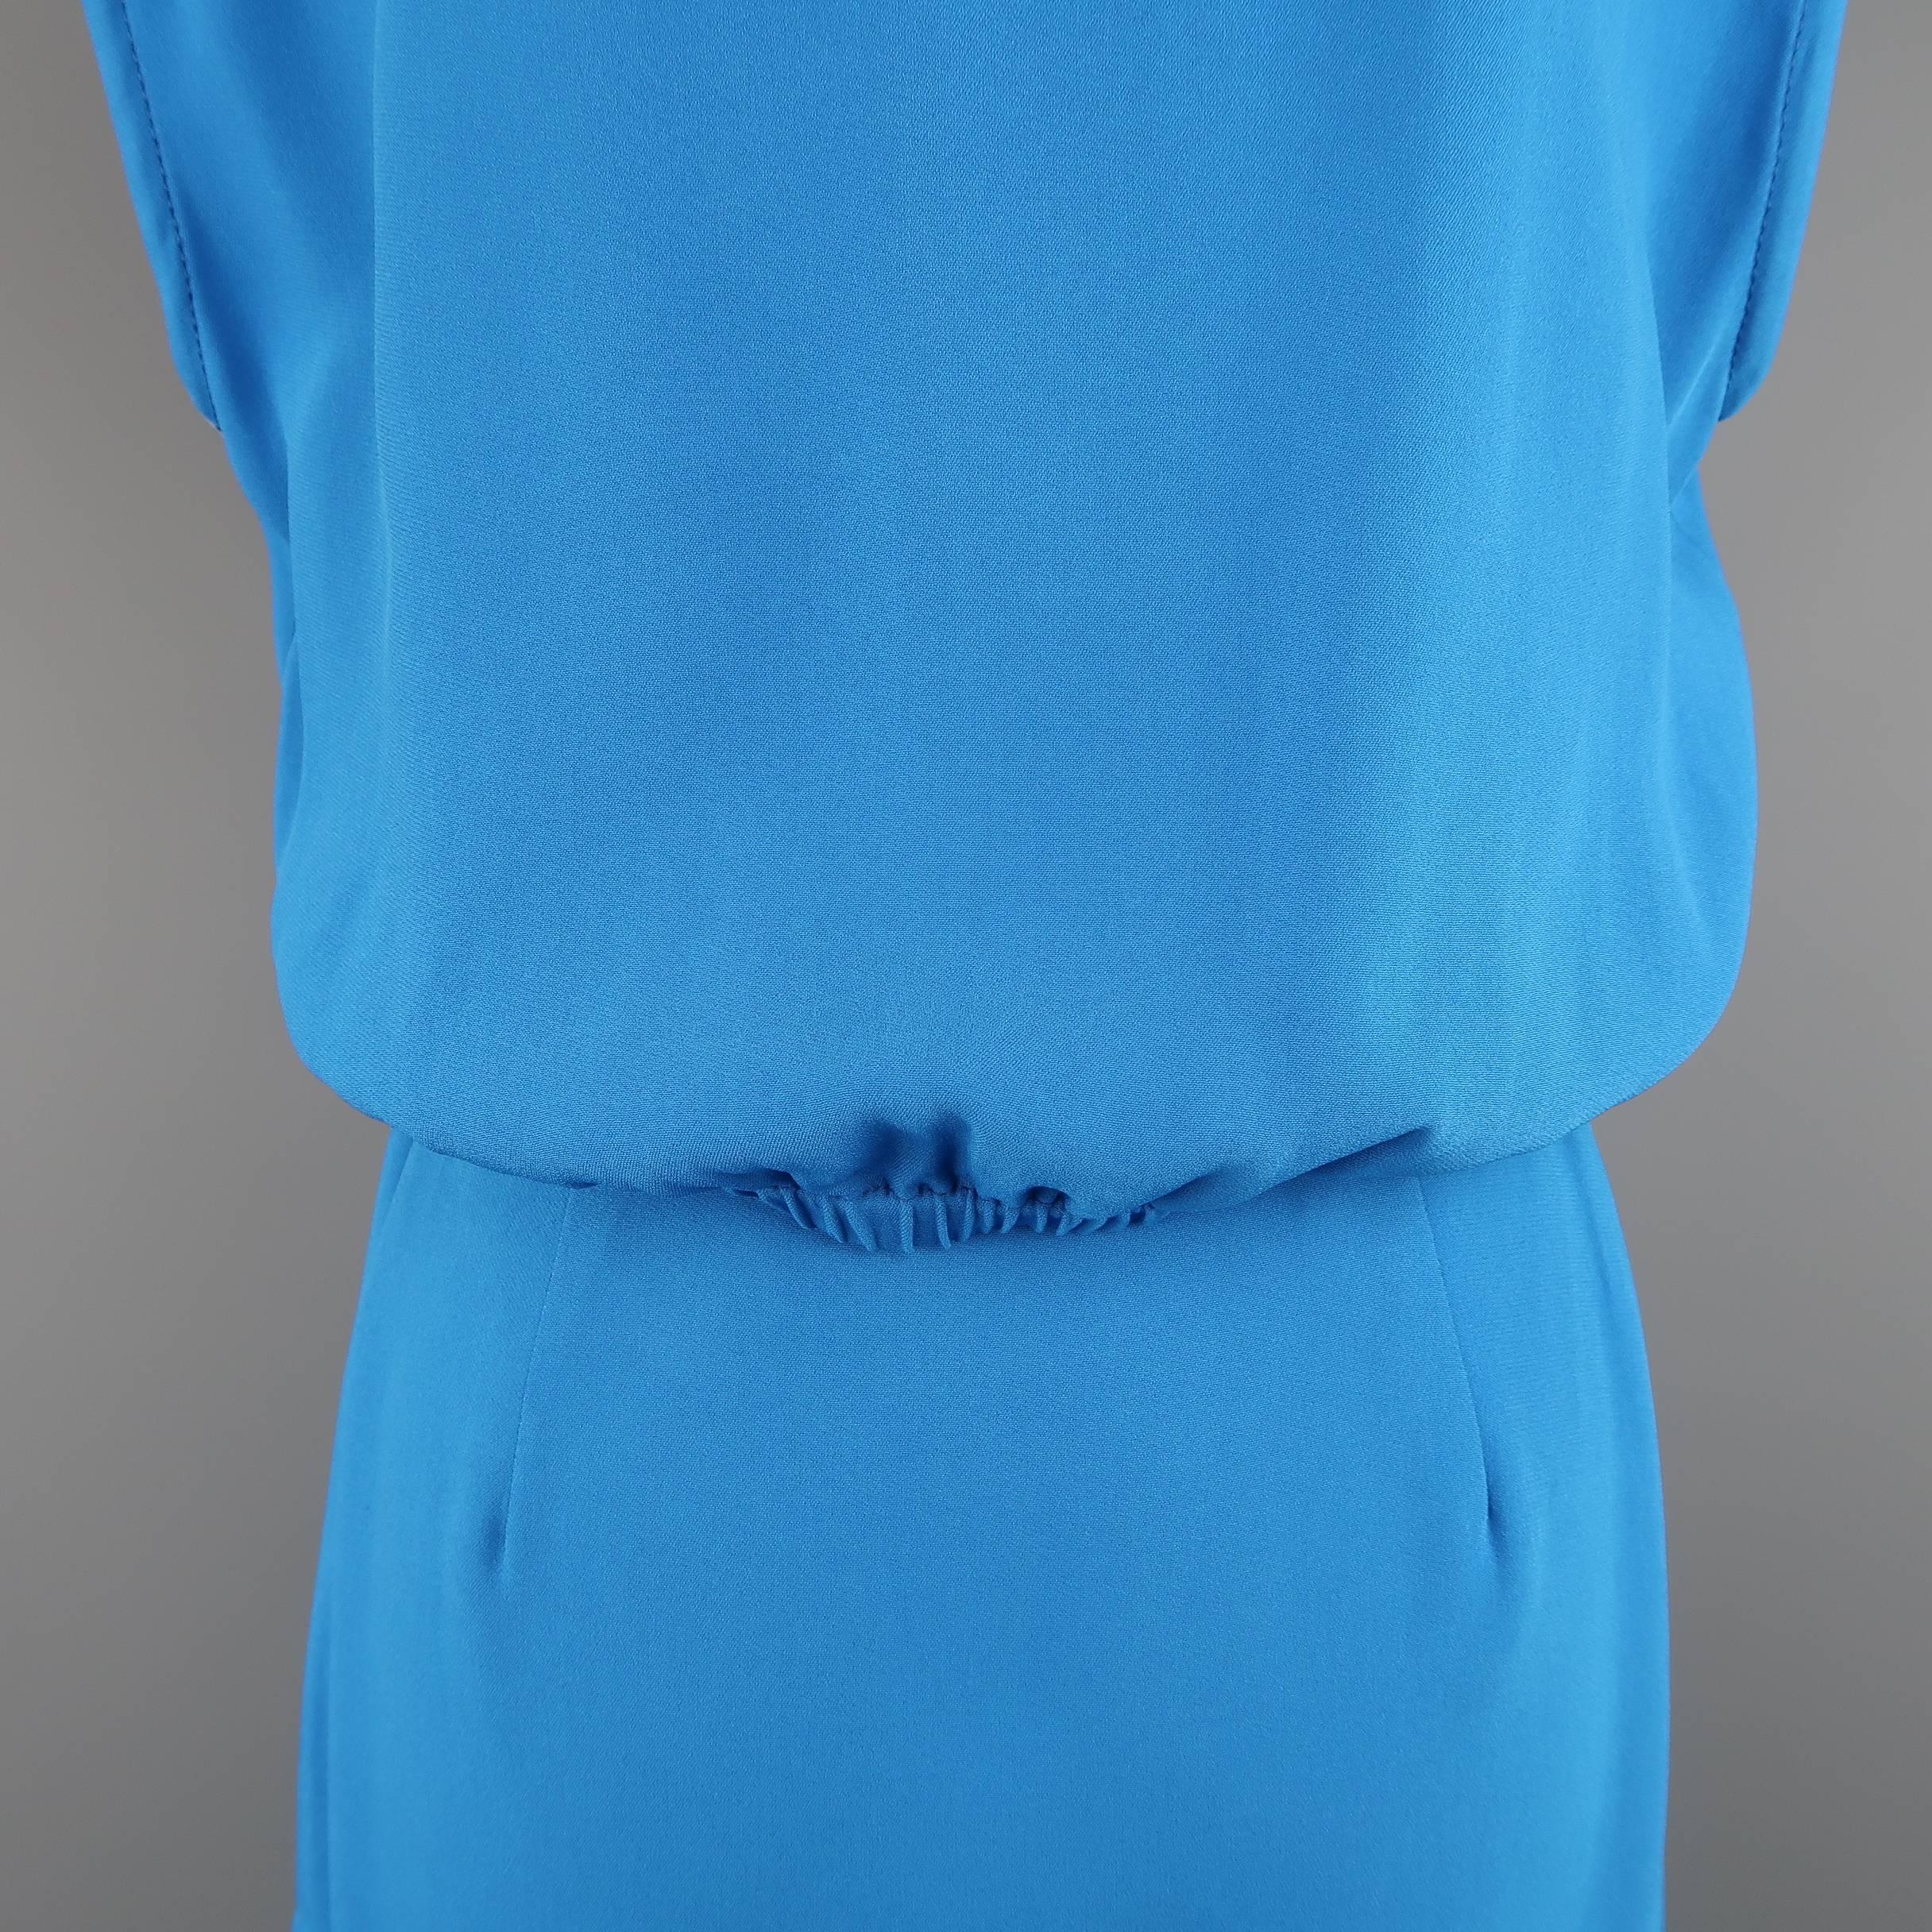 Sleeveless ETRO dress comes in aqua blue viscose blend fabric with a pointed collar, half button front, back cutout, and sash belt. Made in Italy.
 
Excellent Pre-Owned Condition.
Marked: IT 40
 
Measurements:
 
Shoulder: 19 in.
Bust: 40 in.
Waist: